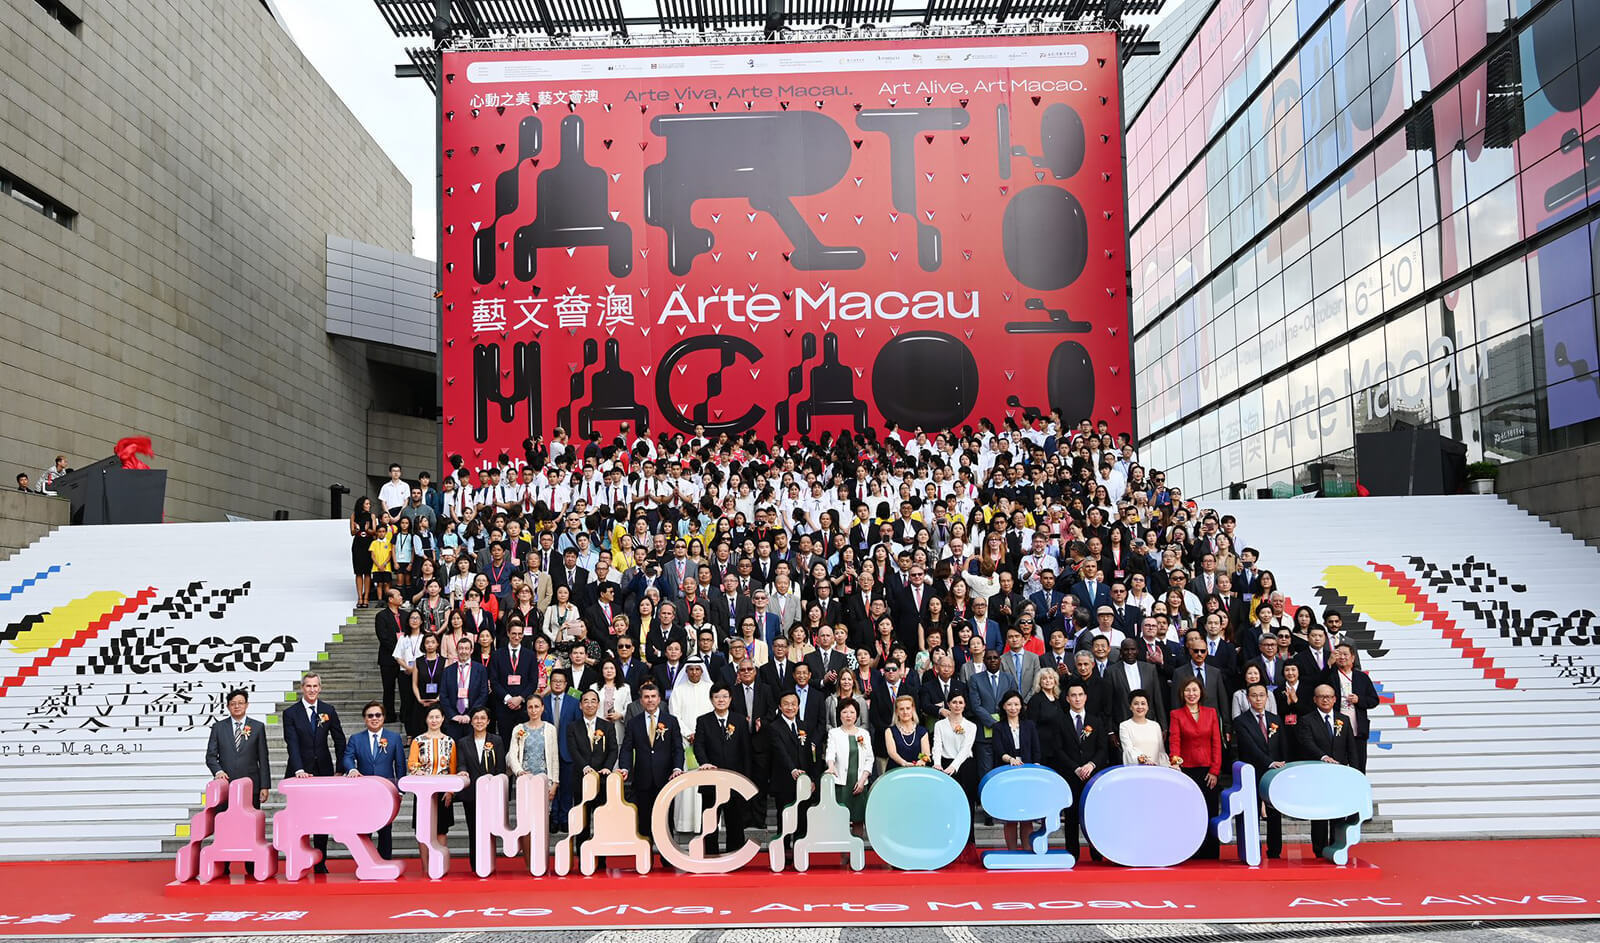 The first Art Macao event was officially inaugurated on 6th June 2019